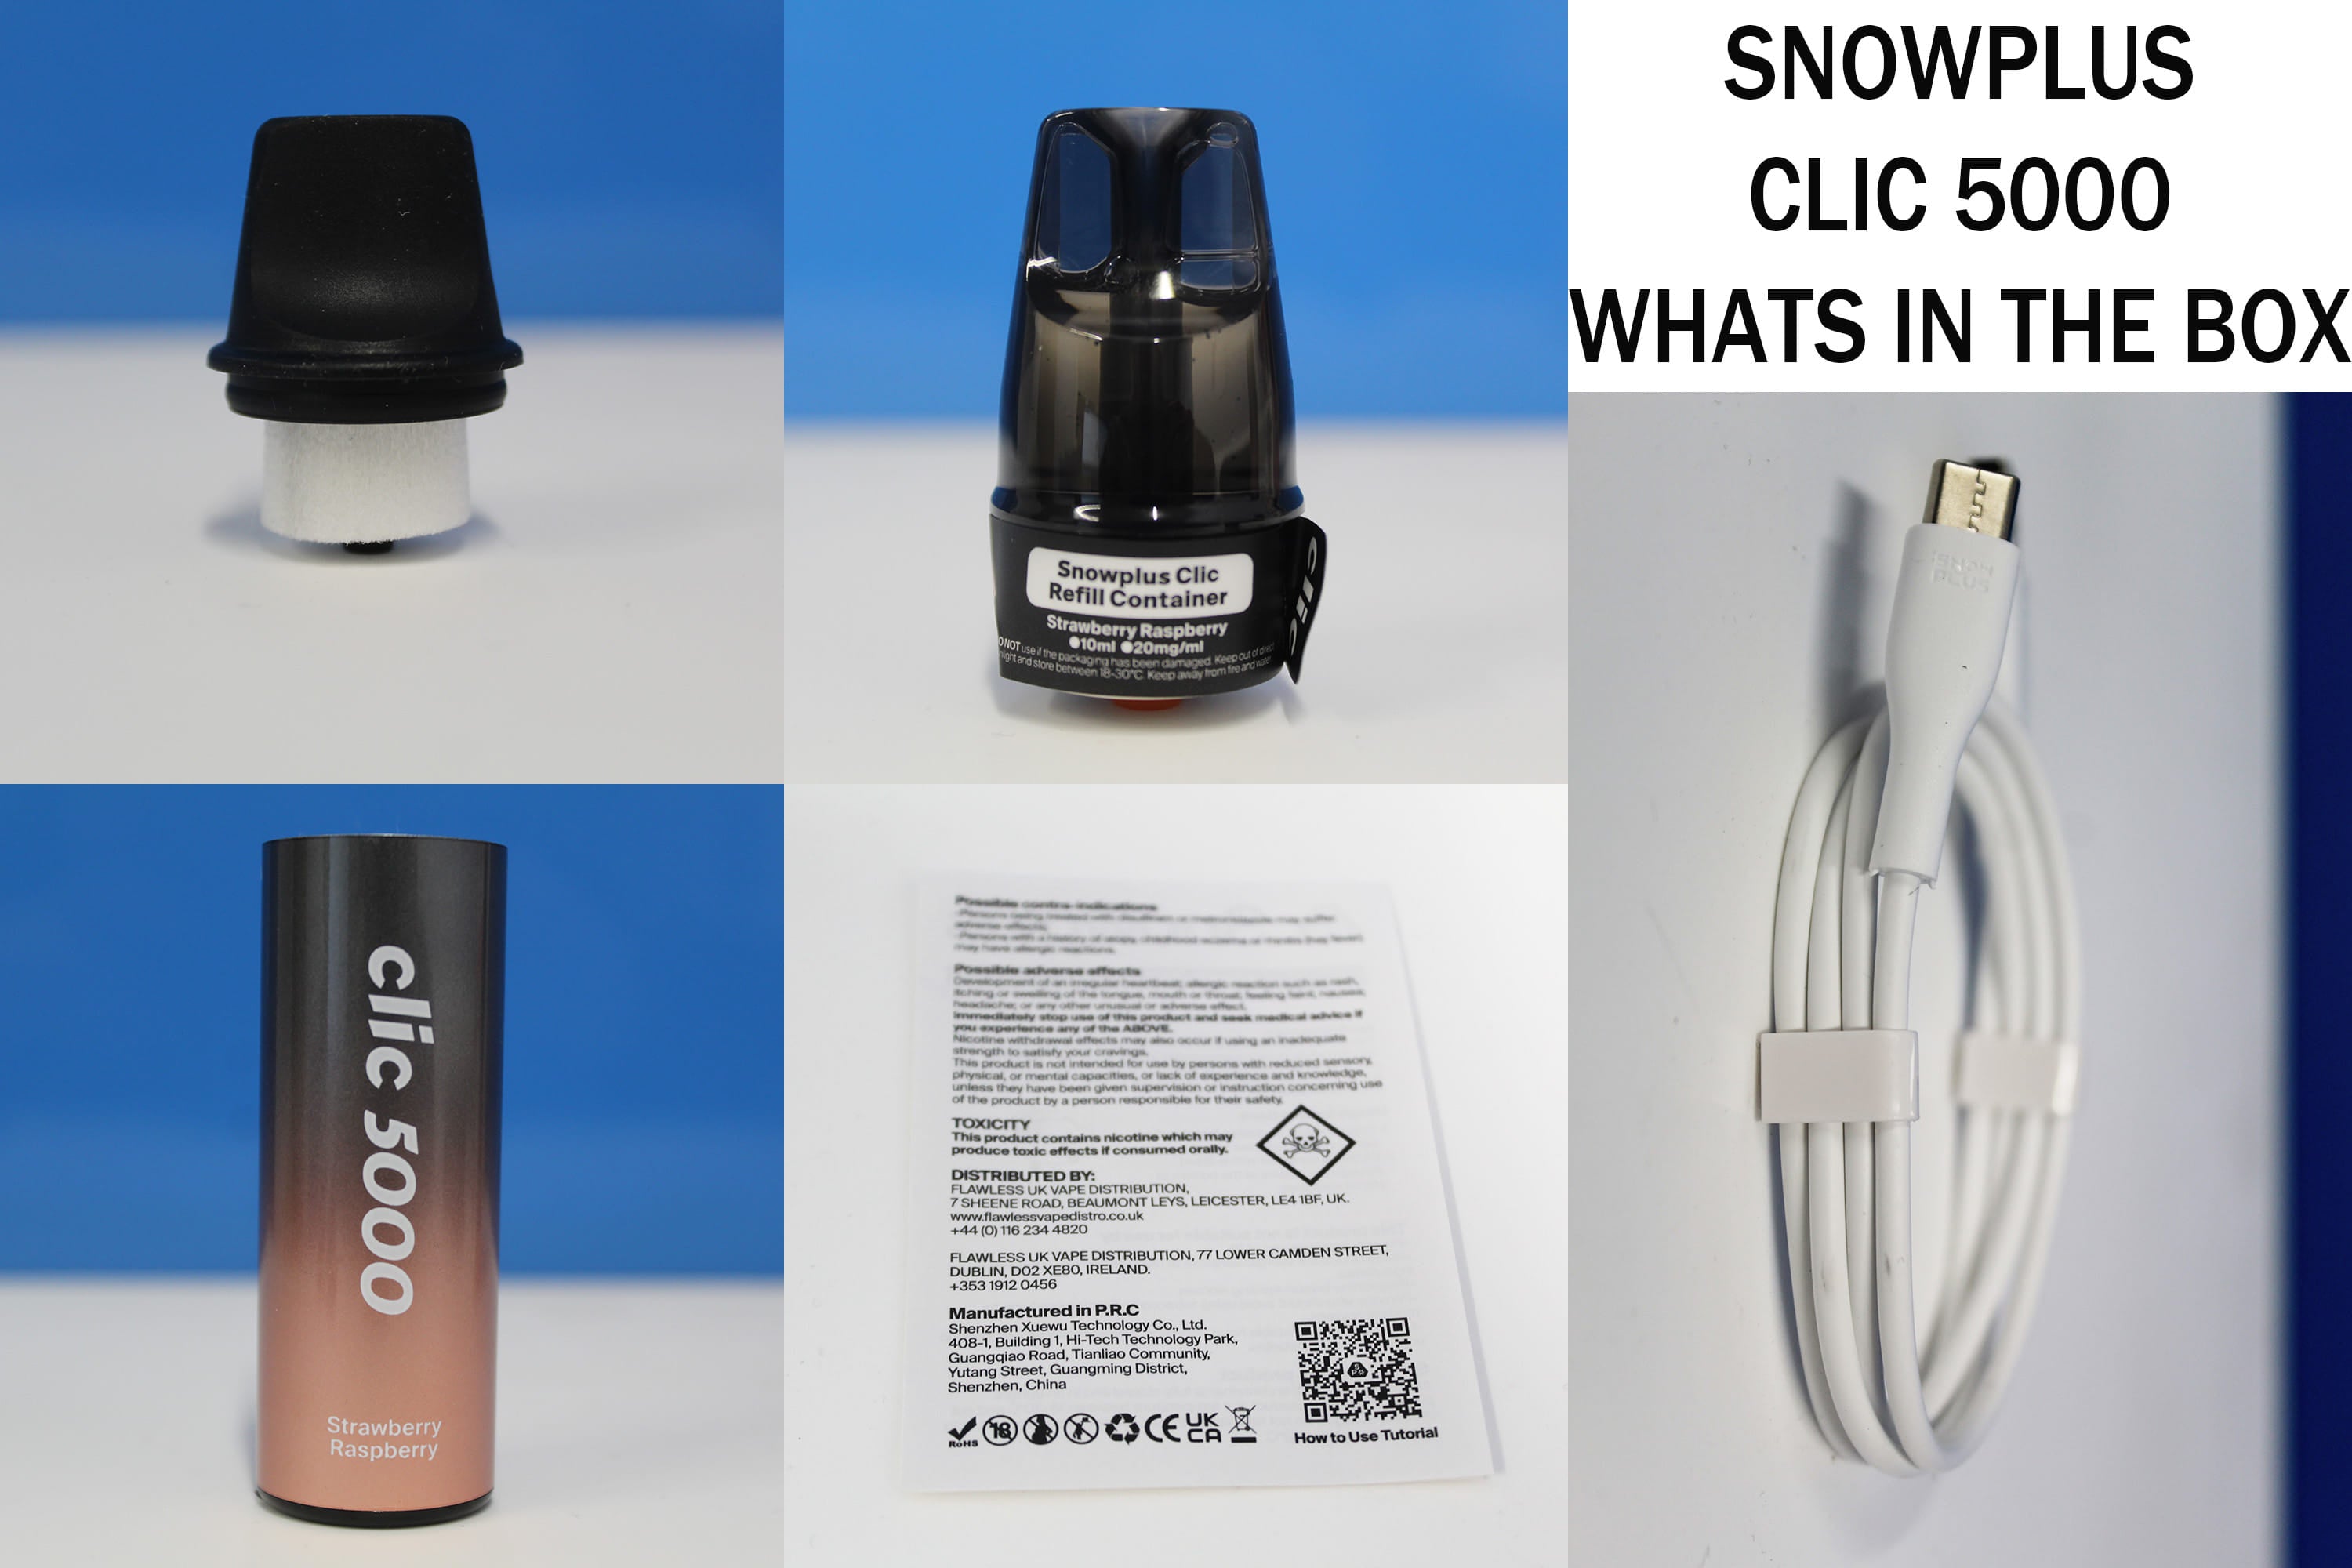 snowplus clic whats in the box